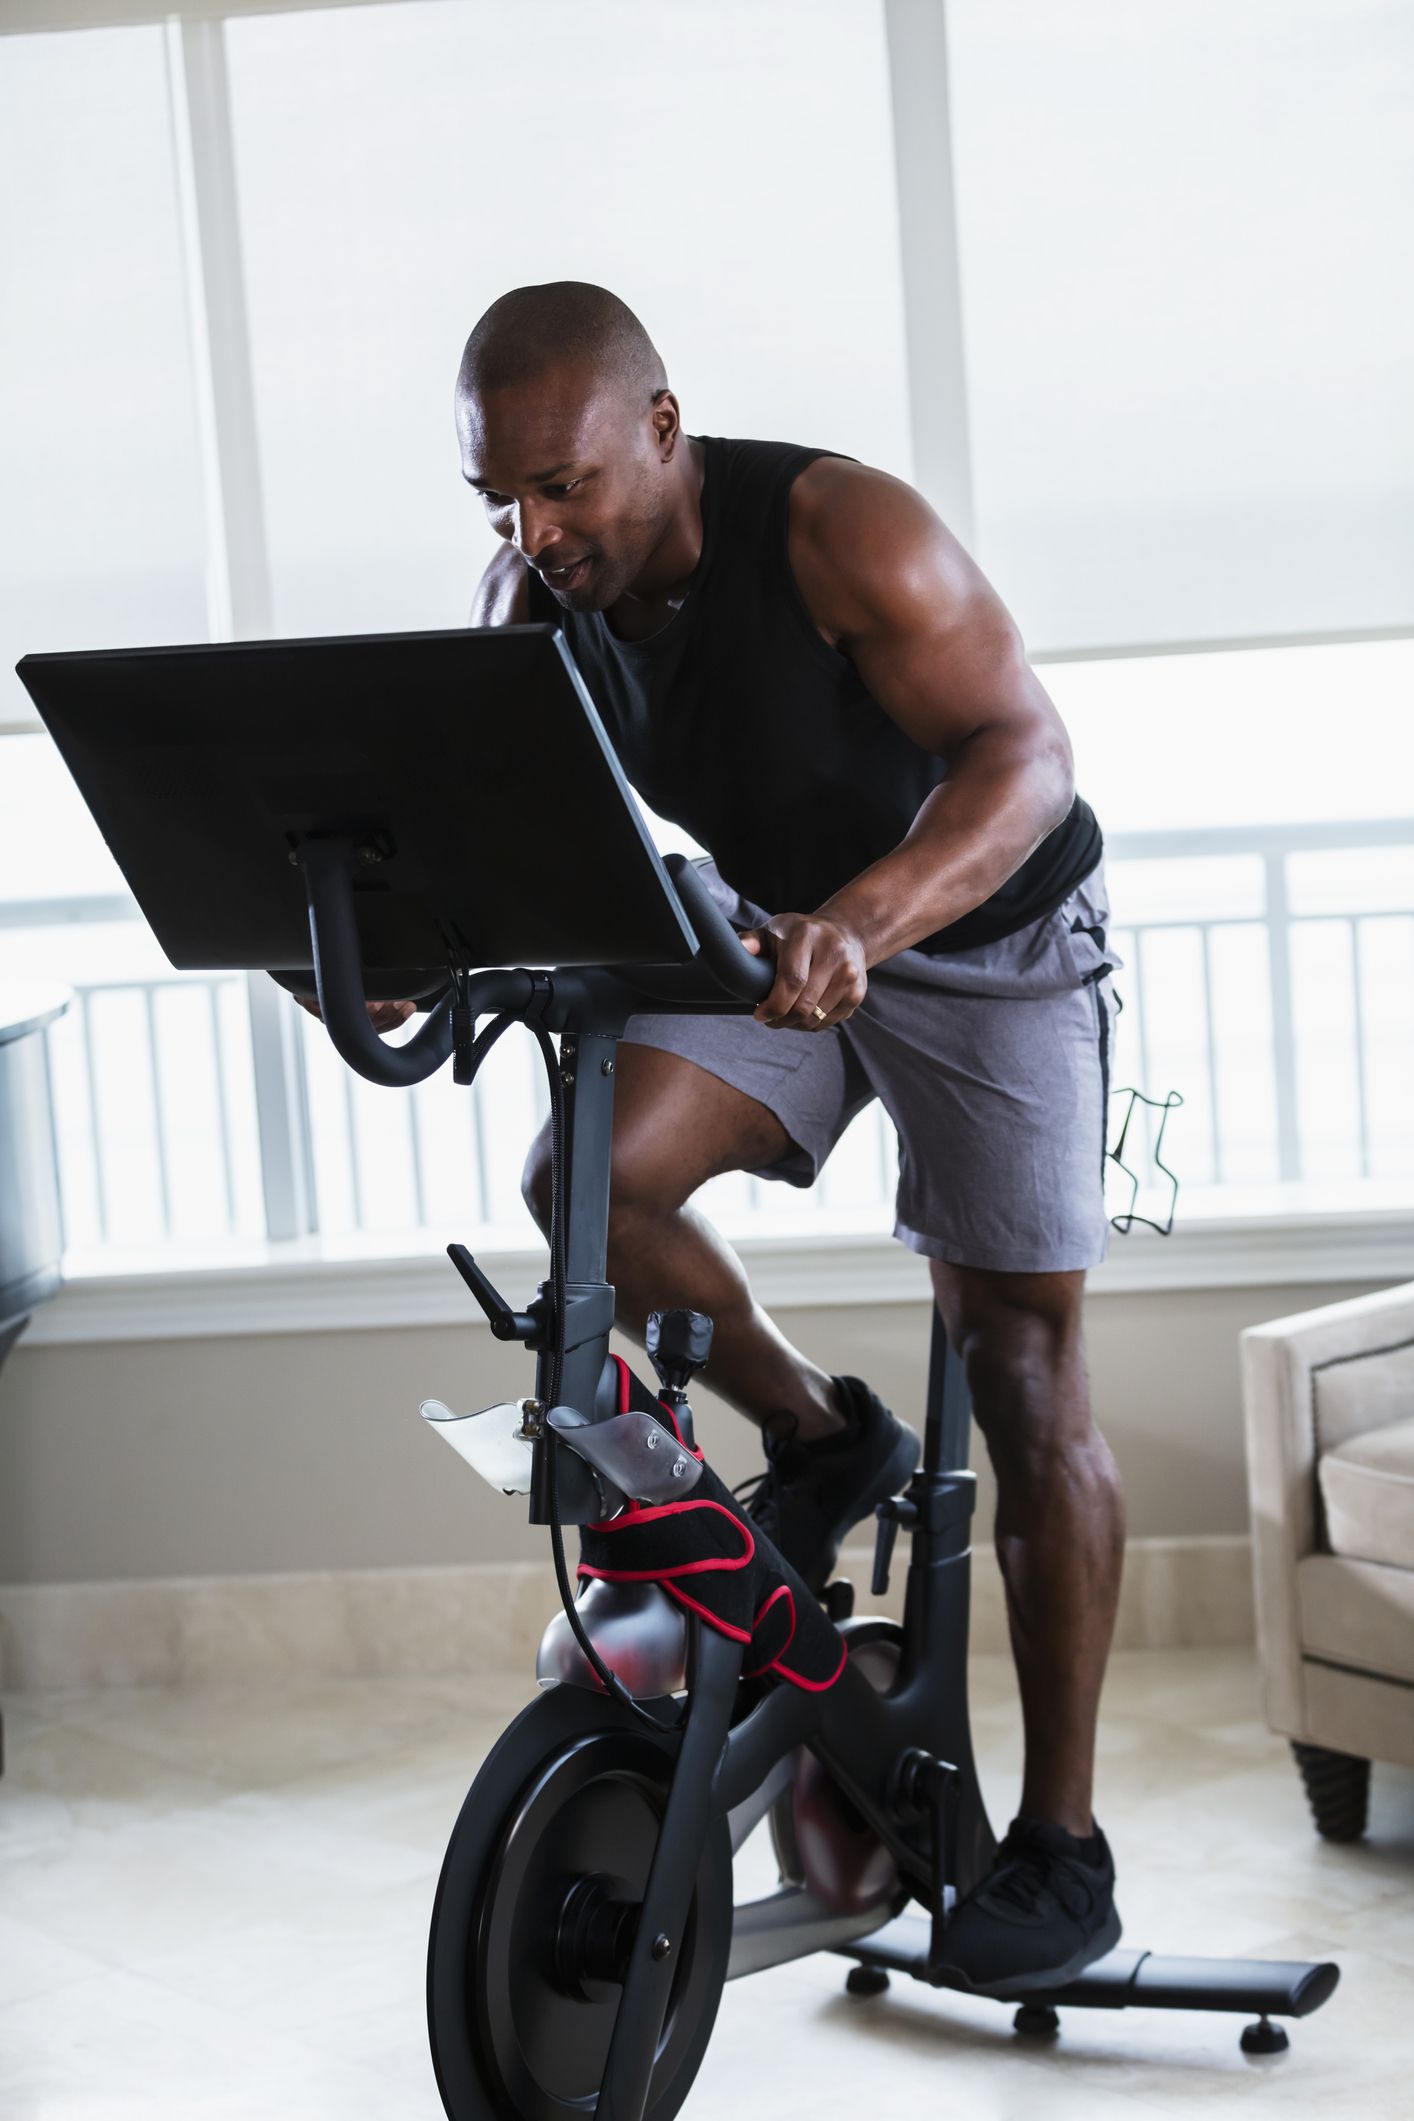 3. What is a Spin Class?